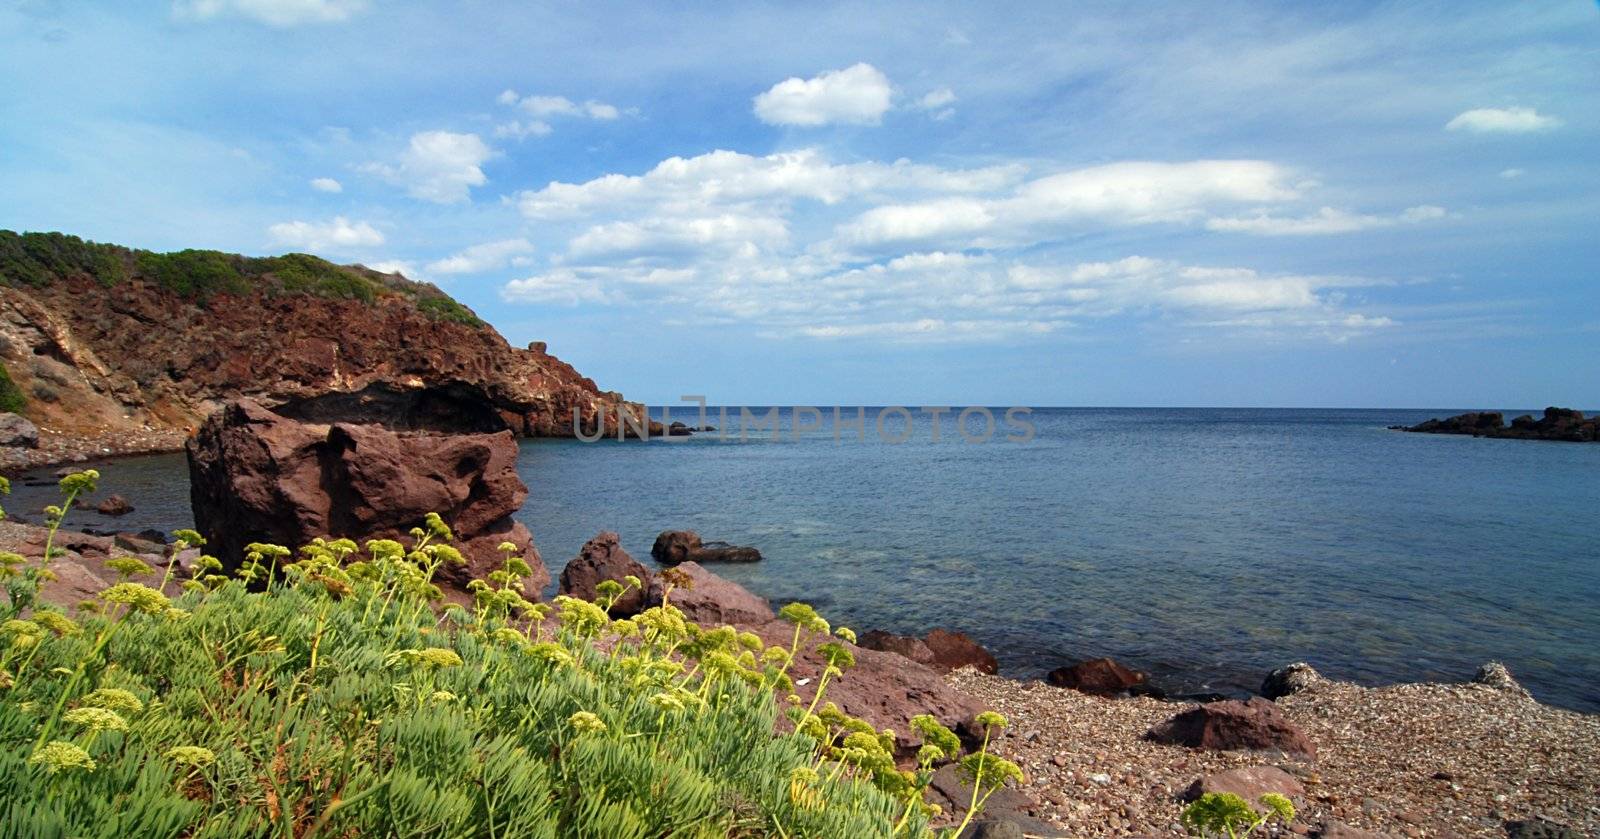 Rocky bay with beach and yellow flowers in te foreground